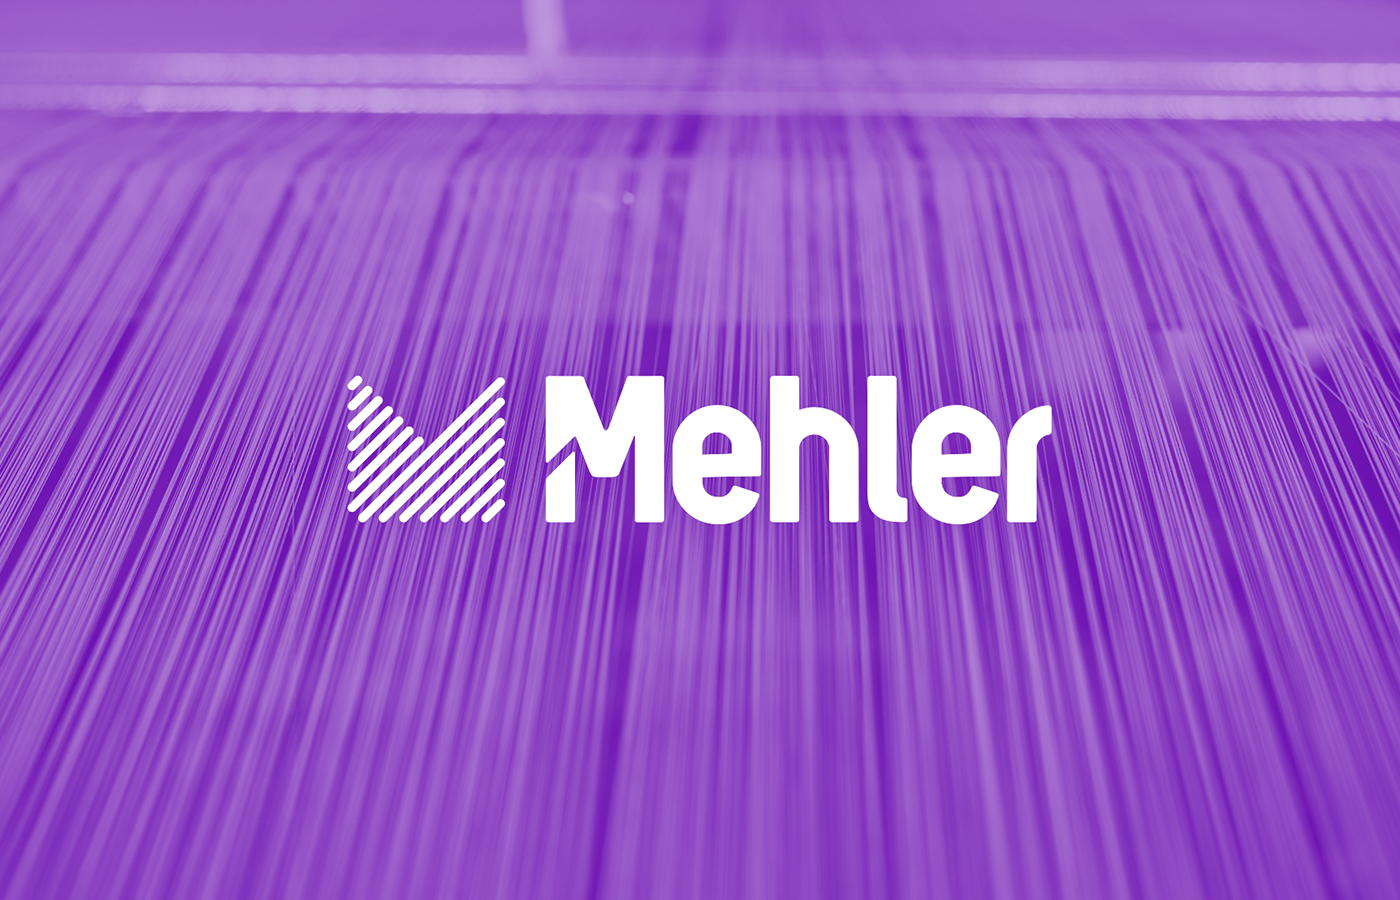 Mehler shaping the future brand